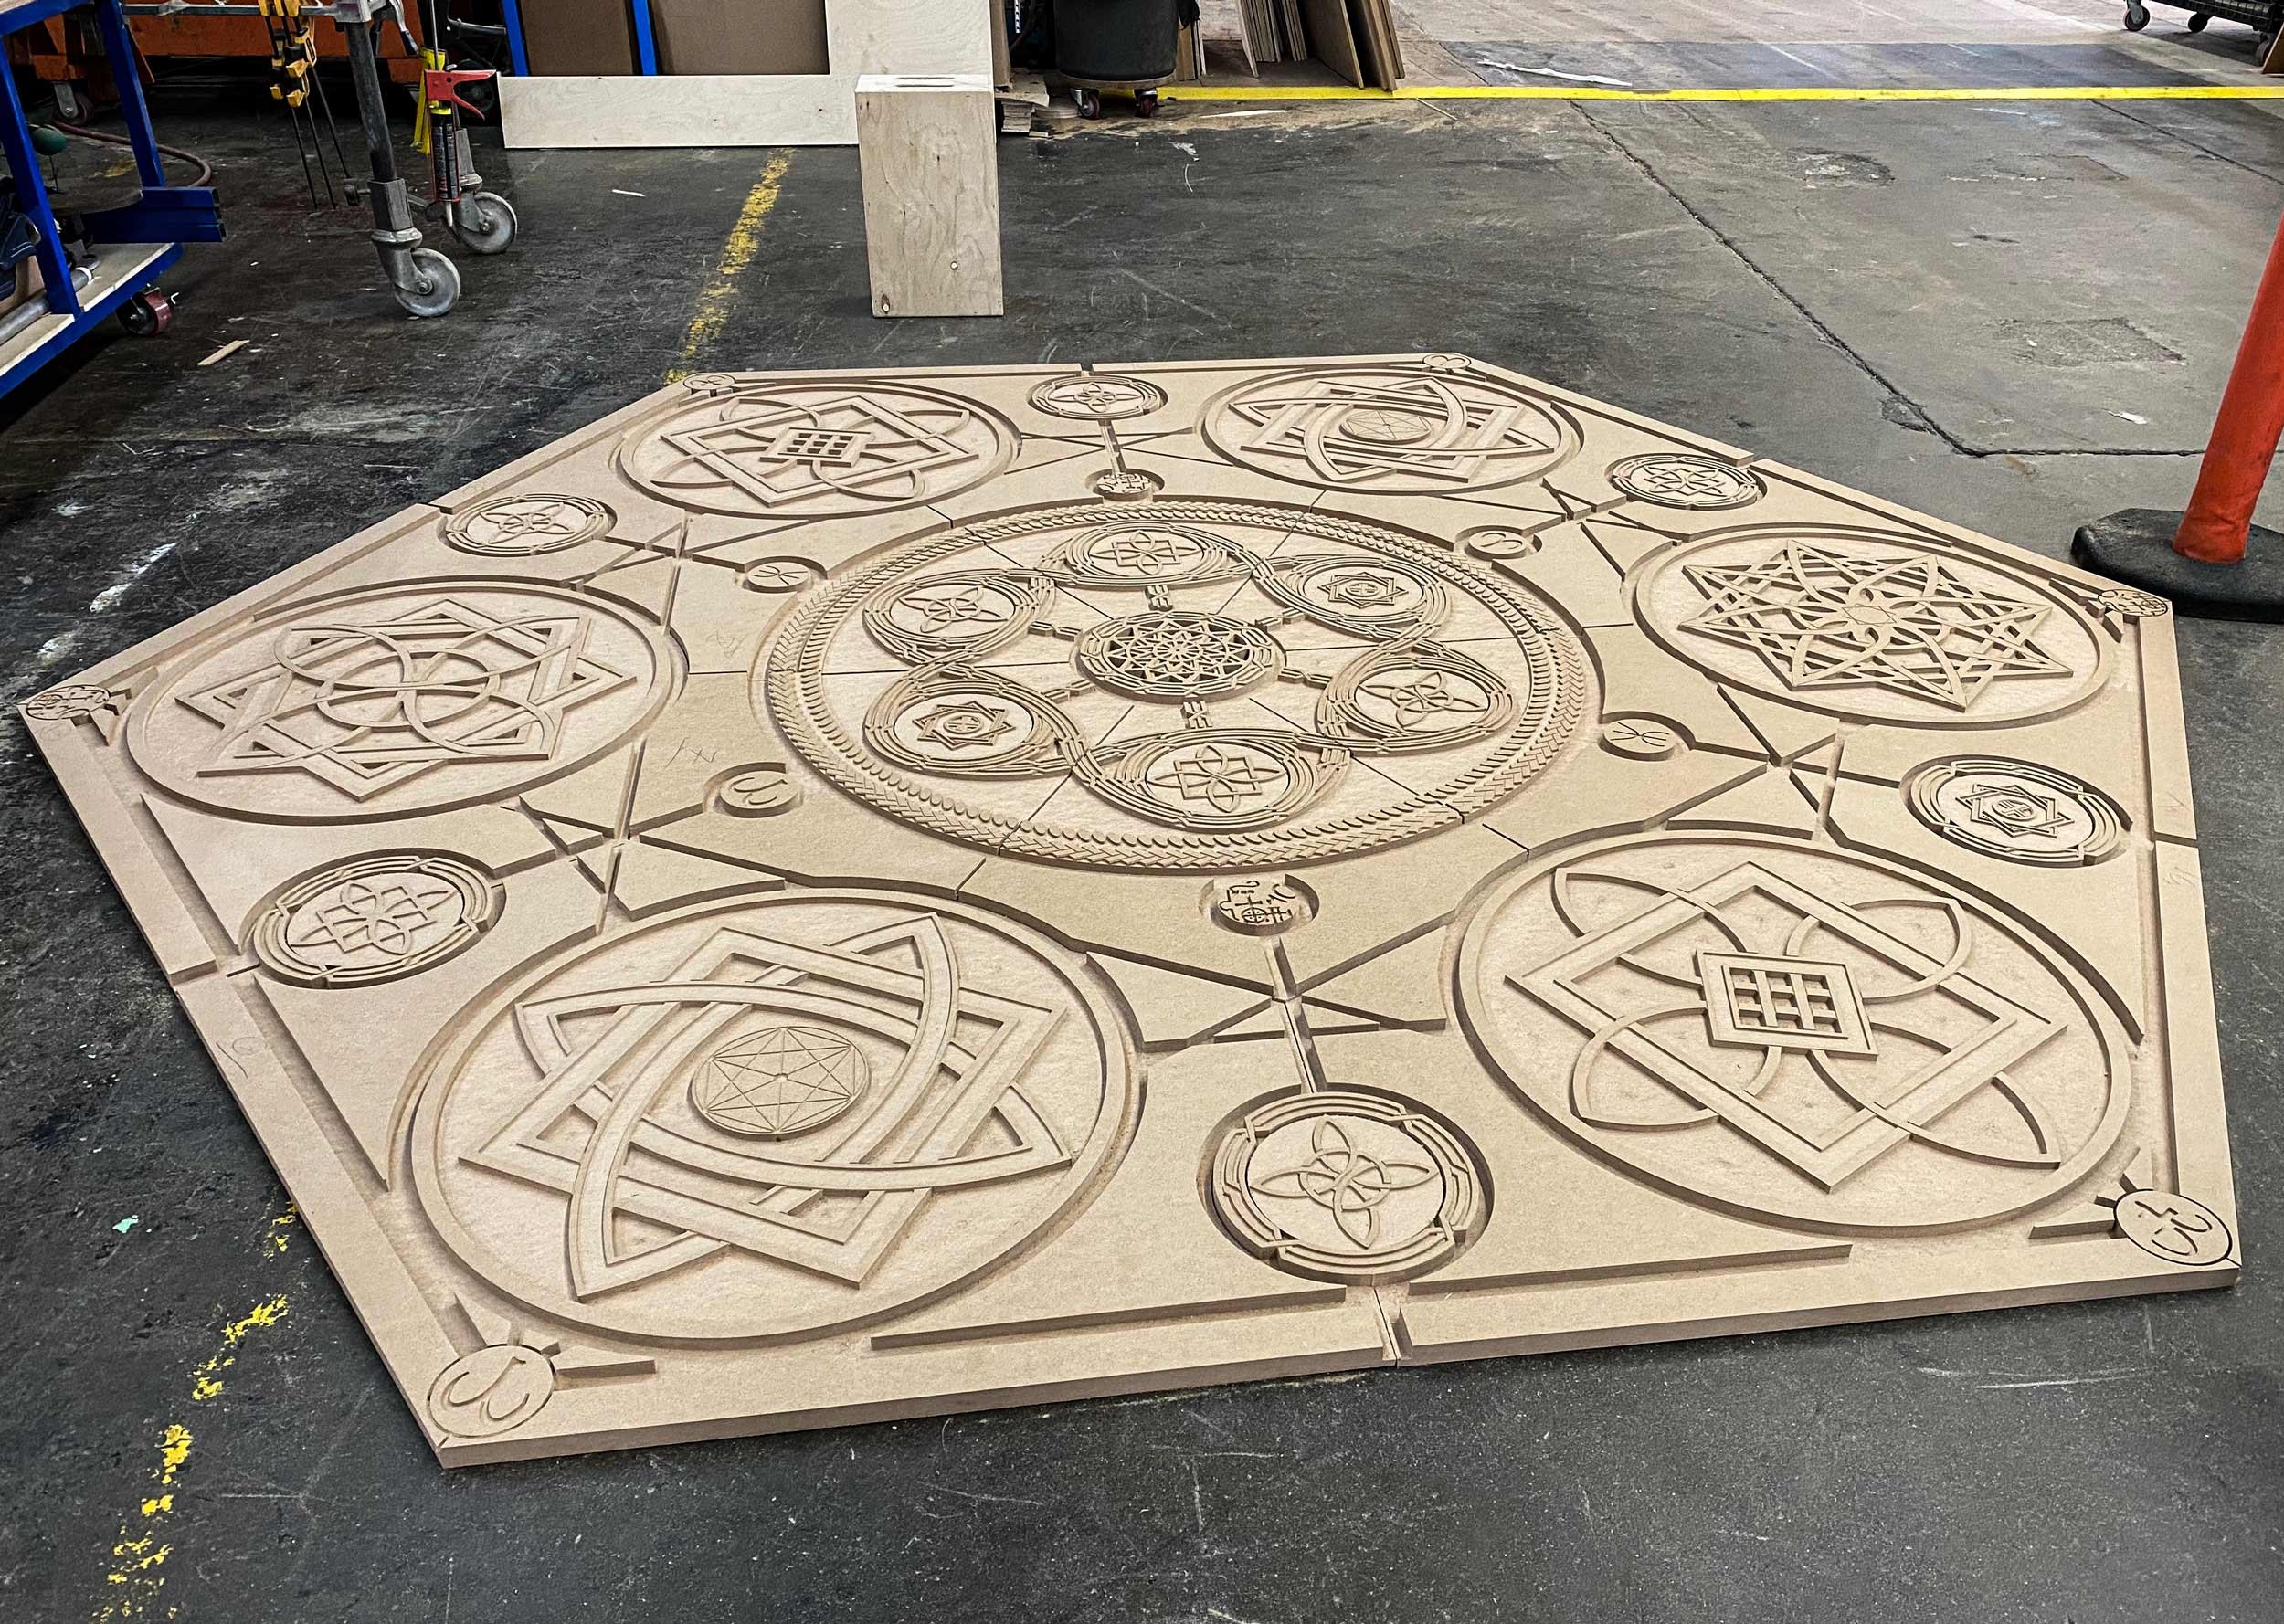  The 8 MDF pieces as received from the CNC vendor. 